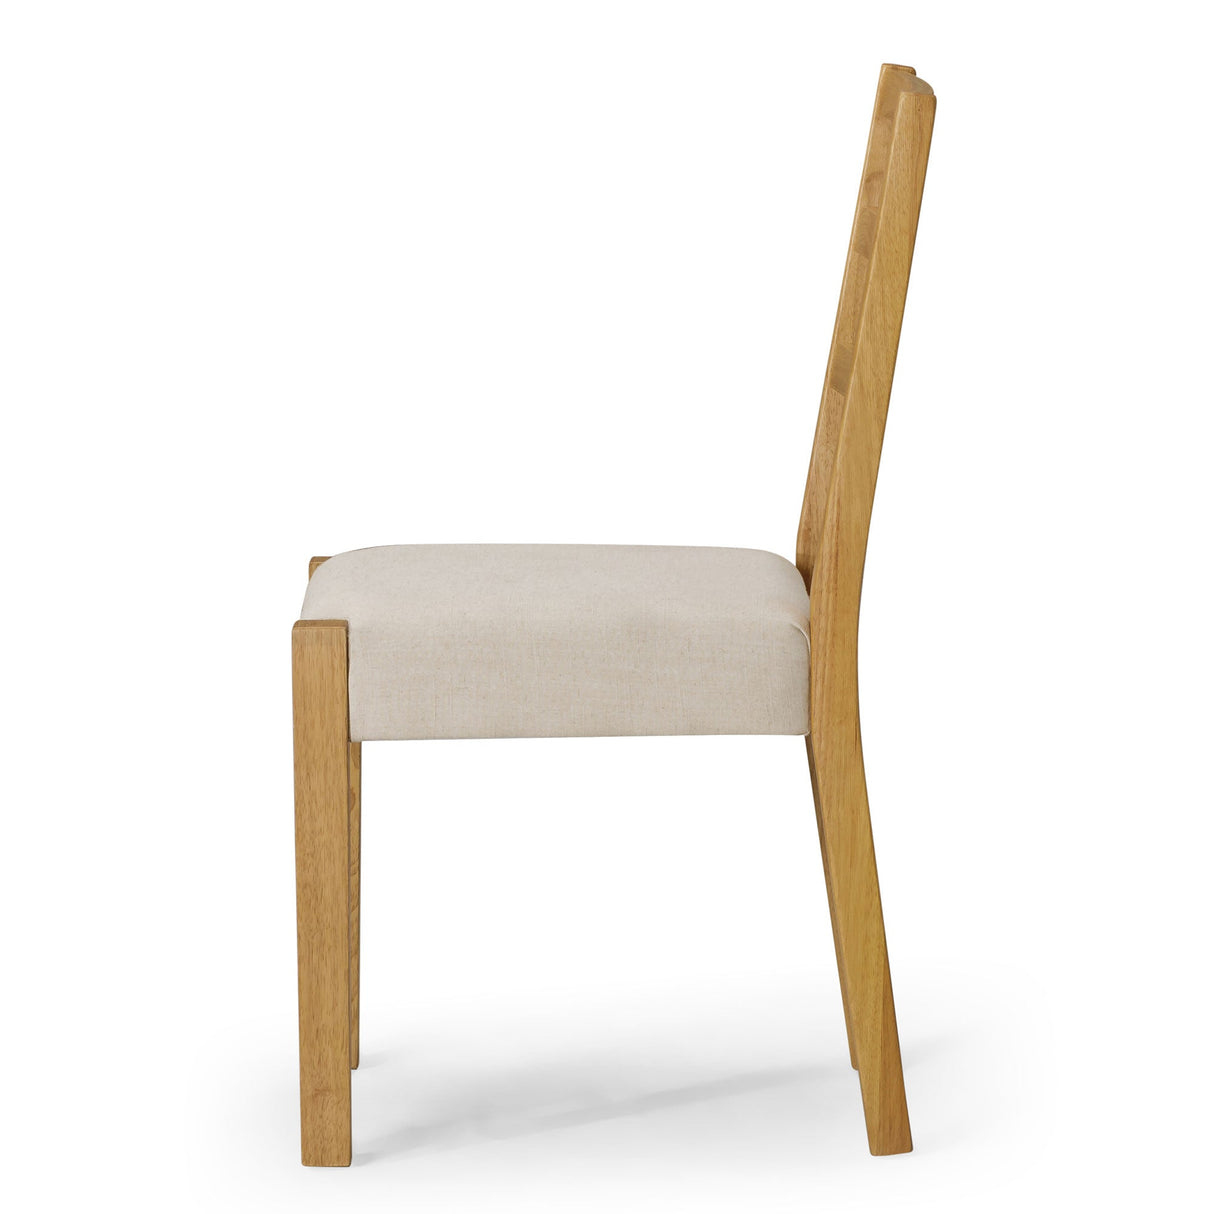 Maven Lane Willow Rustic Dining Chair, Natural With Taupe Linen Fabric, Set of 2